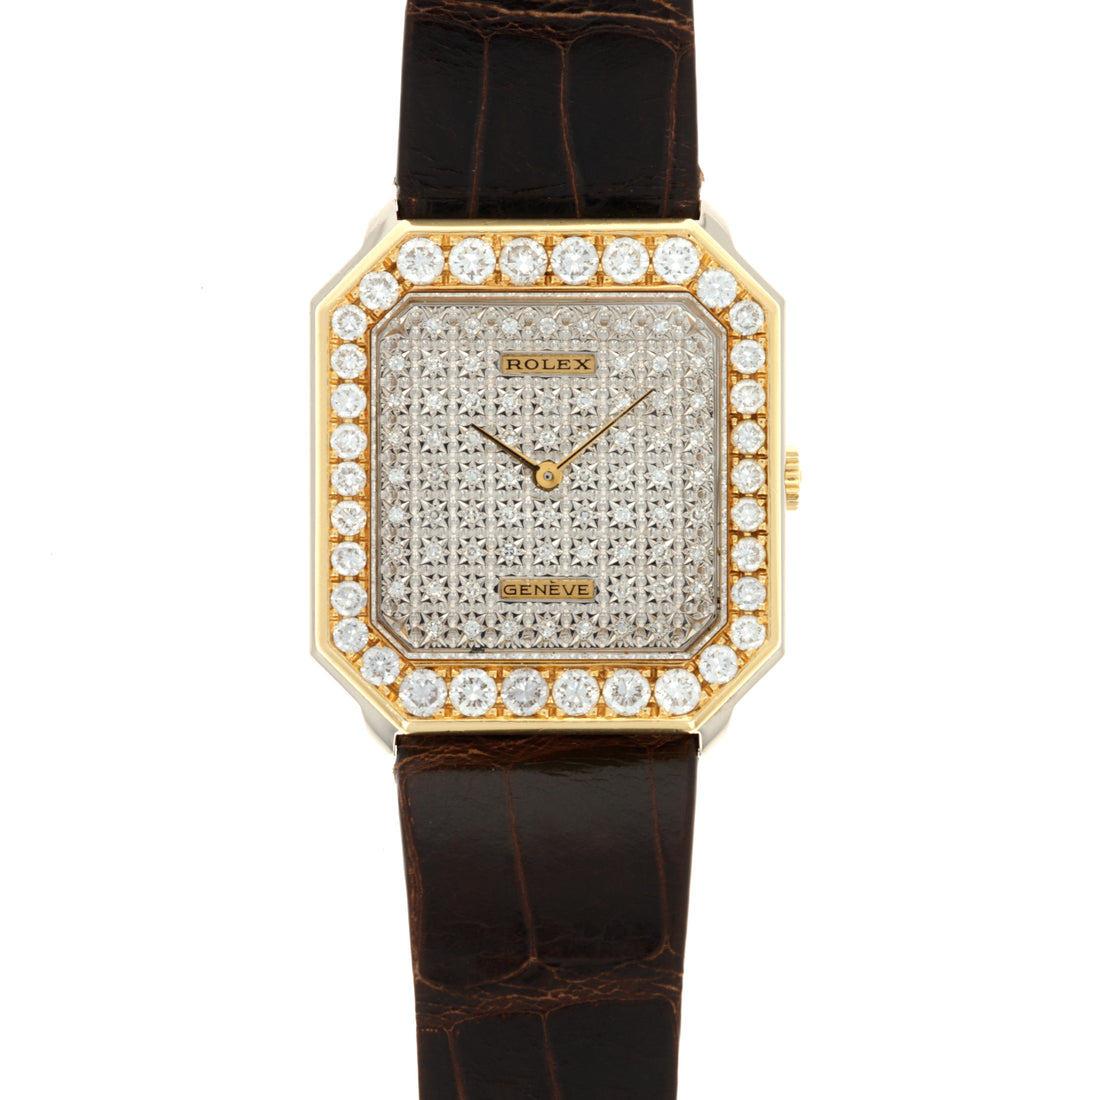 Rolex Yellow Gold Diamond Watch Ref. 5032, Made for the Sultan of Oman